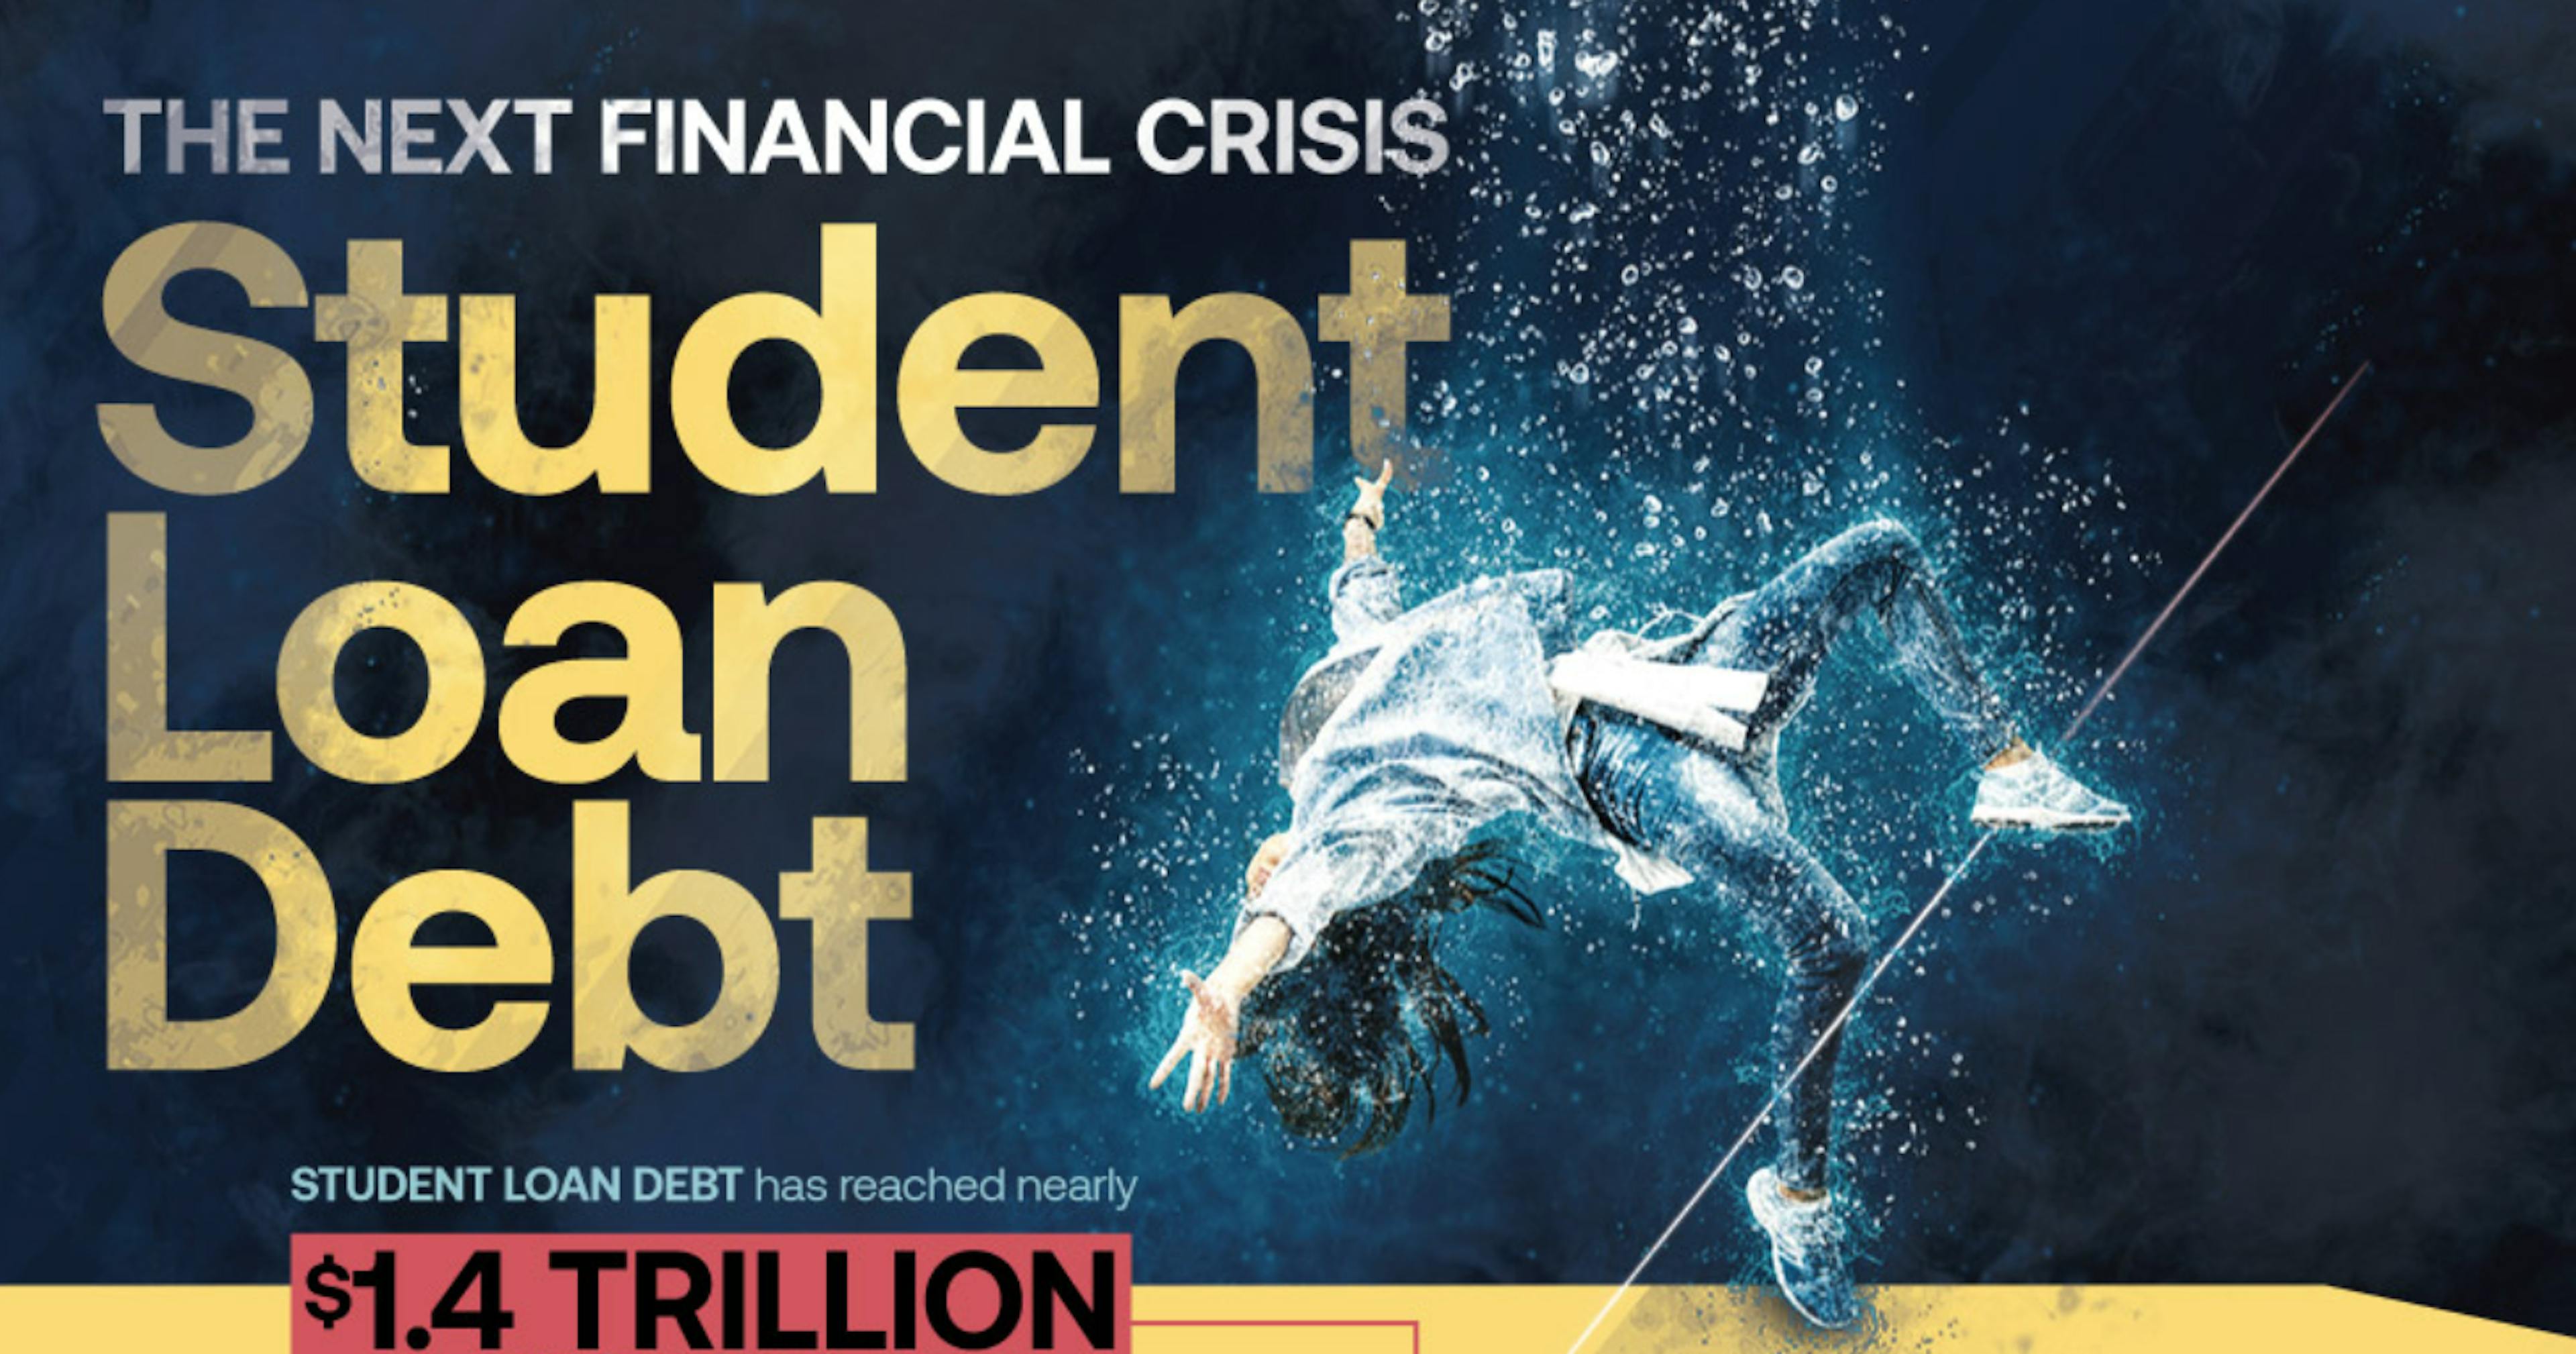 featured image - How to Survive the Next Financial Crisis: Student Loan Debt